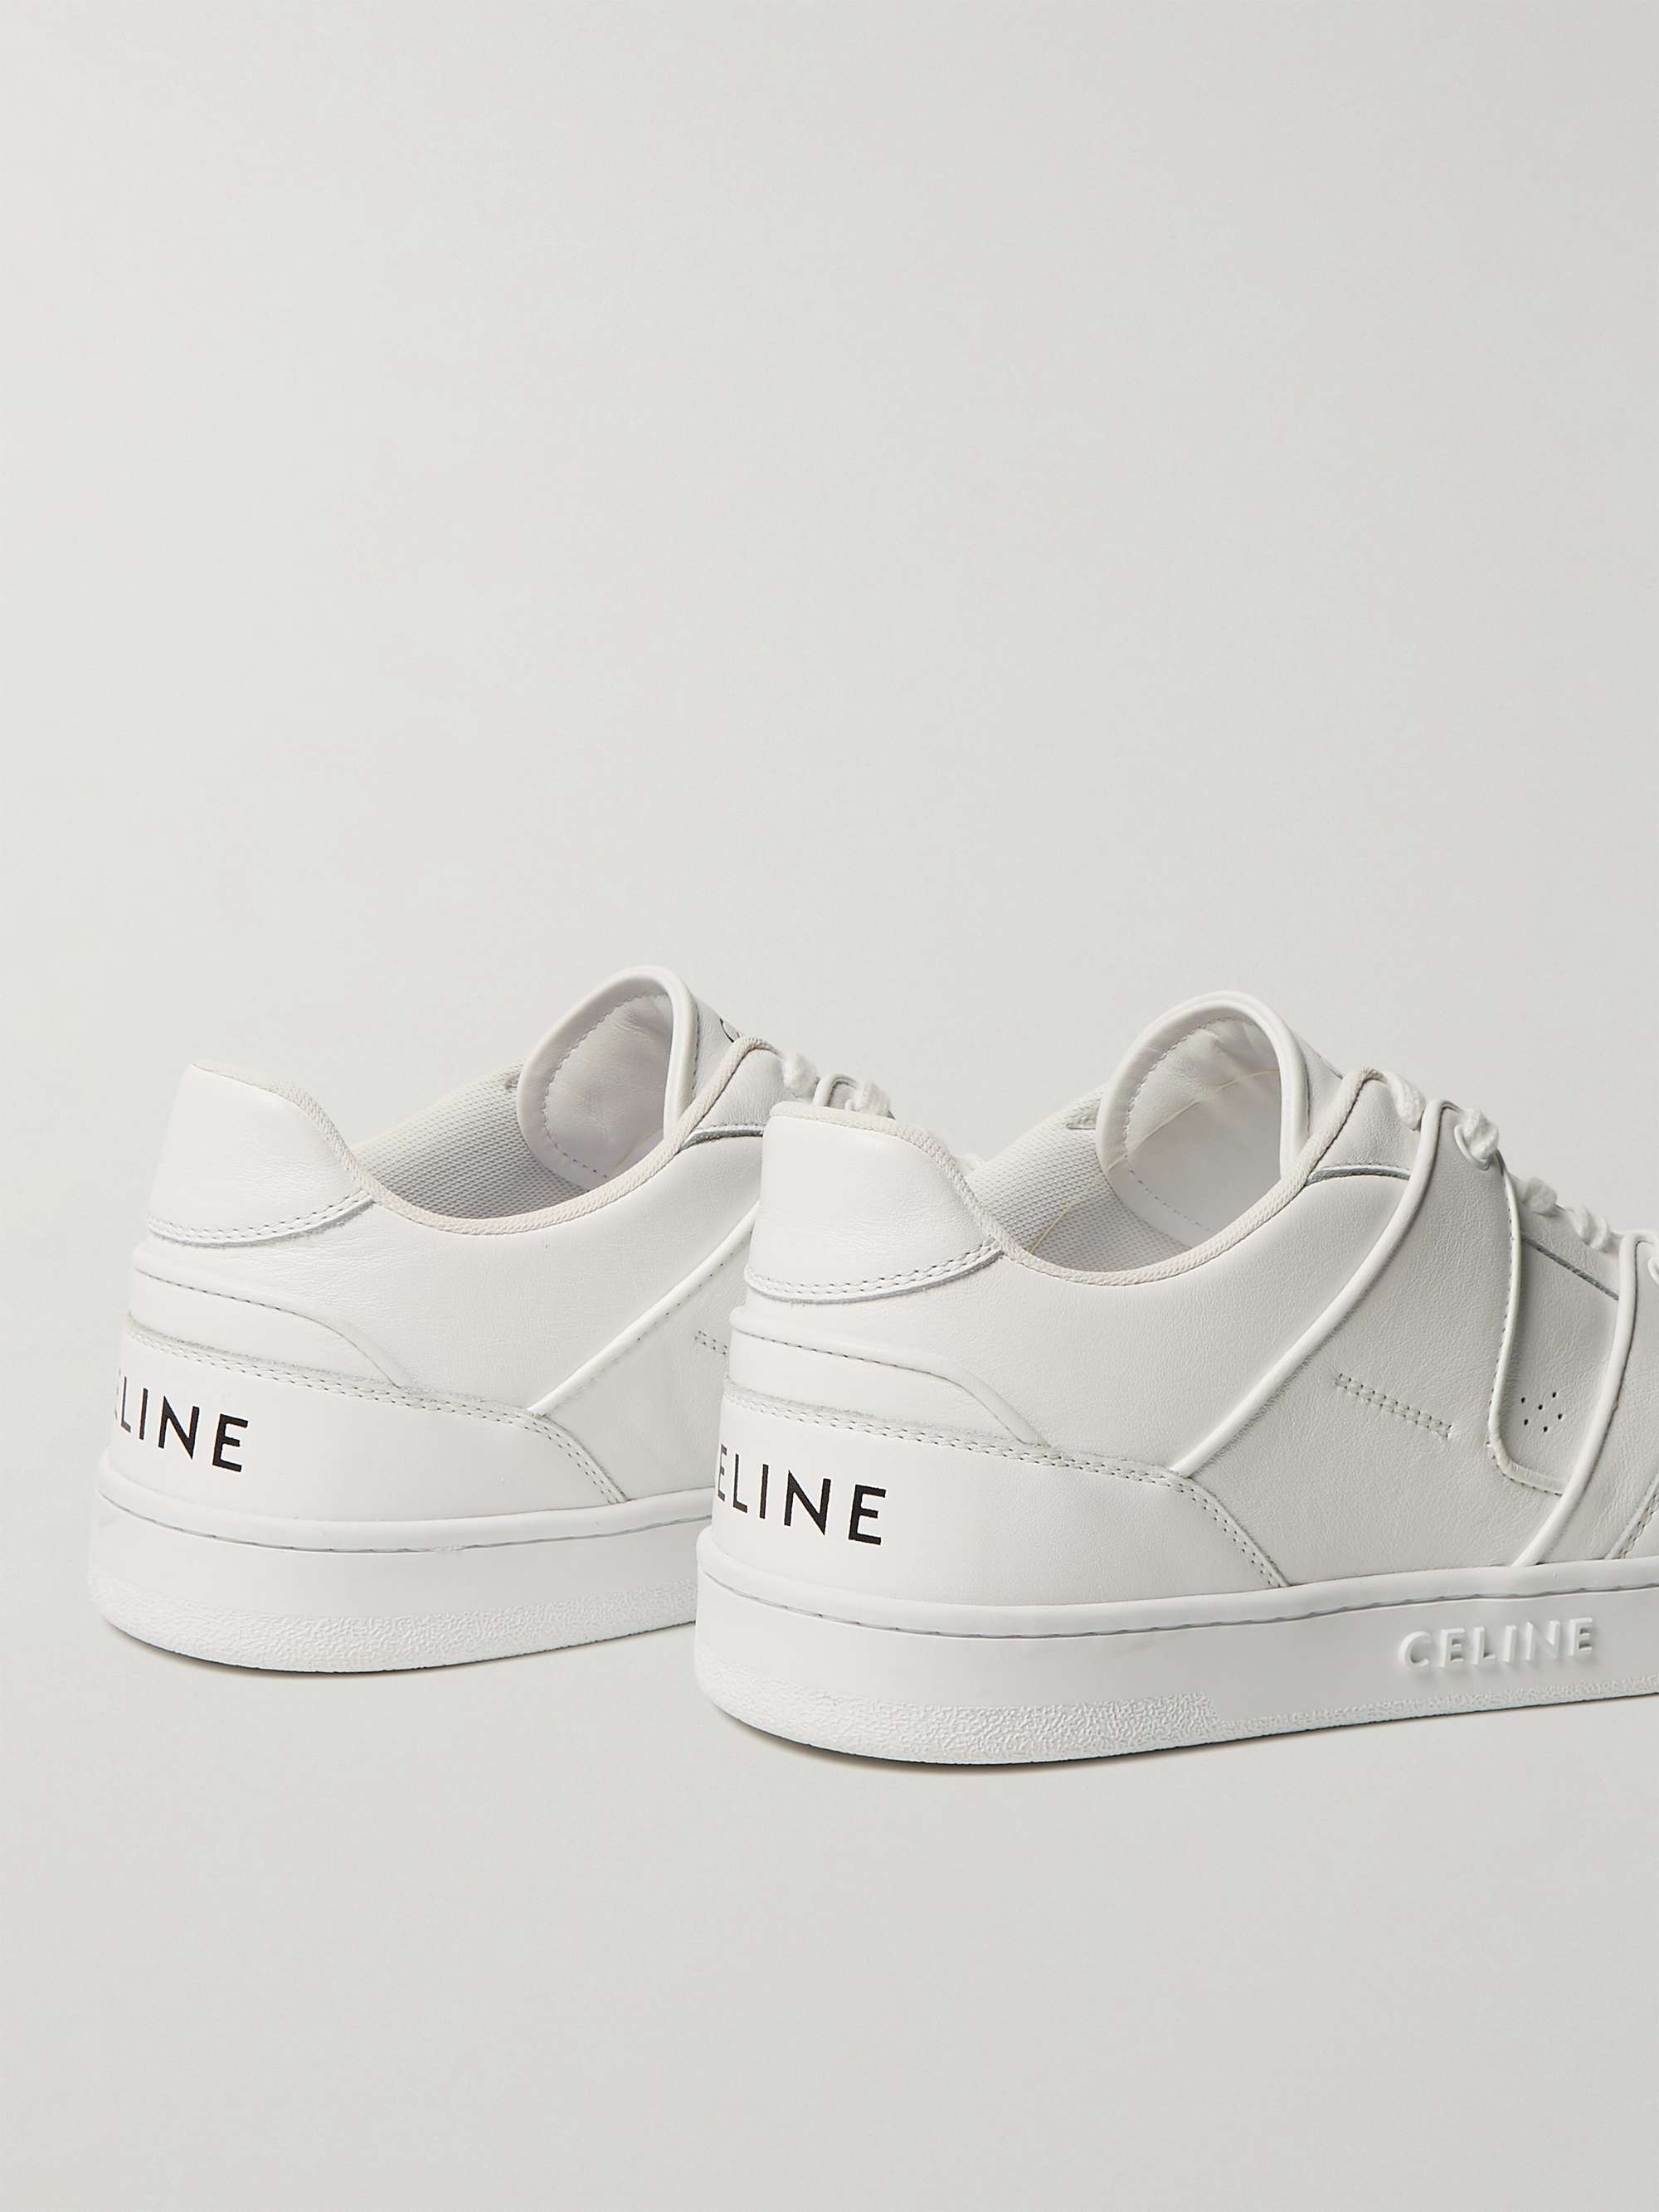 CELINE HOMME Leather Sneakers